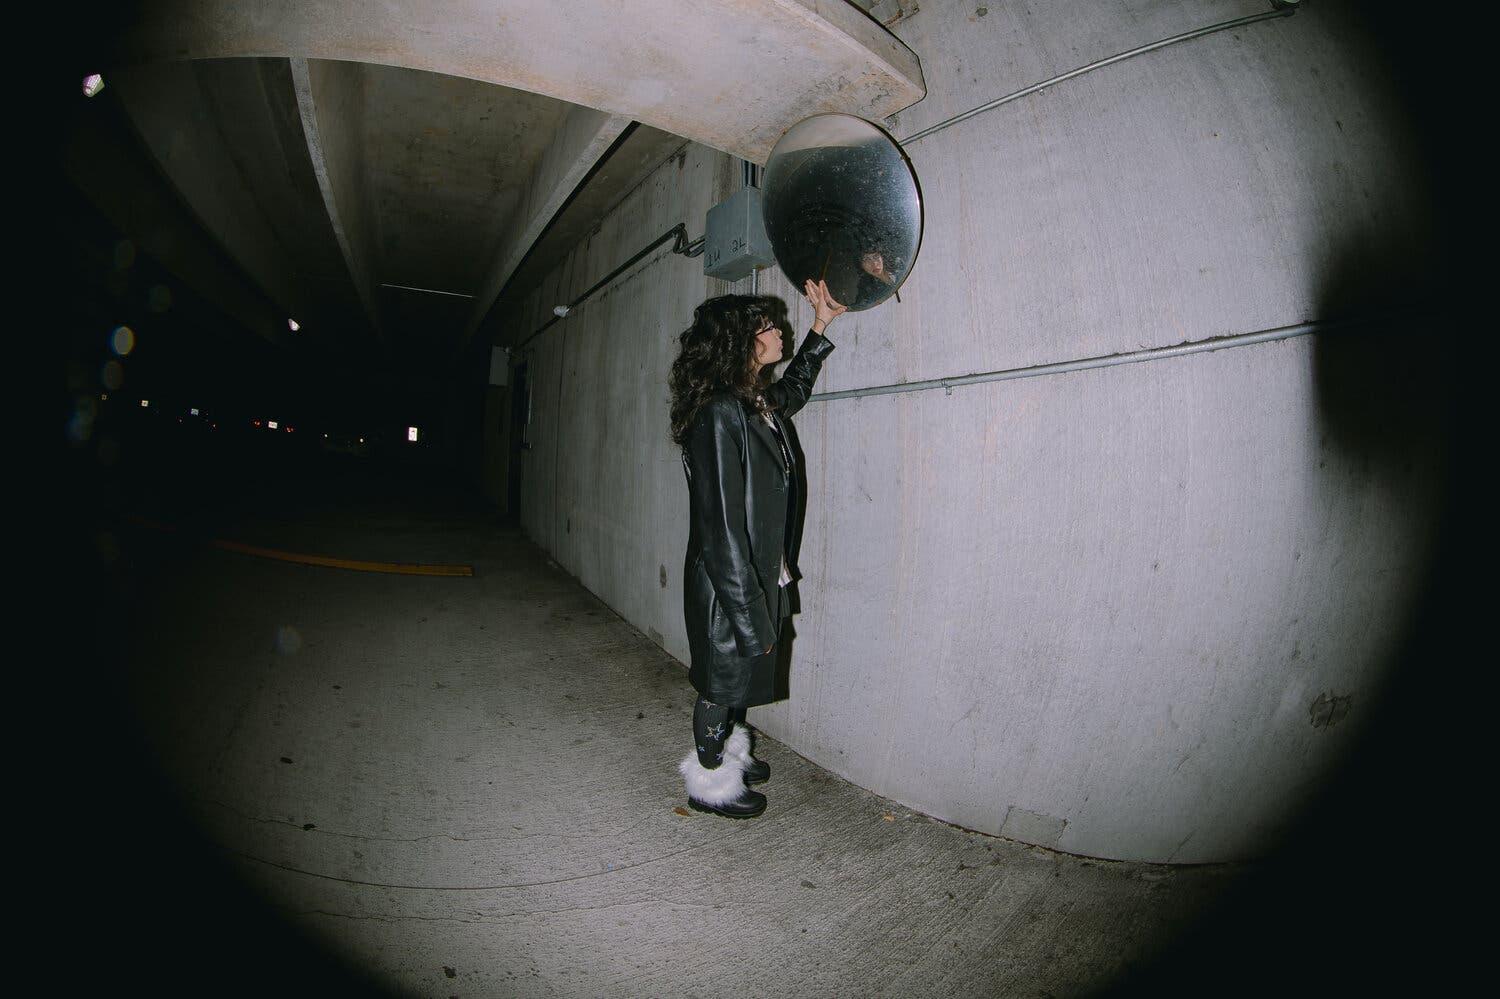 Mercedes Jimenez-Cortez, dressed in a long black leather coat, touches a concave traffic mirror in a dark parking garage.